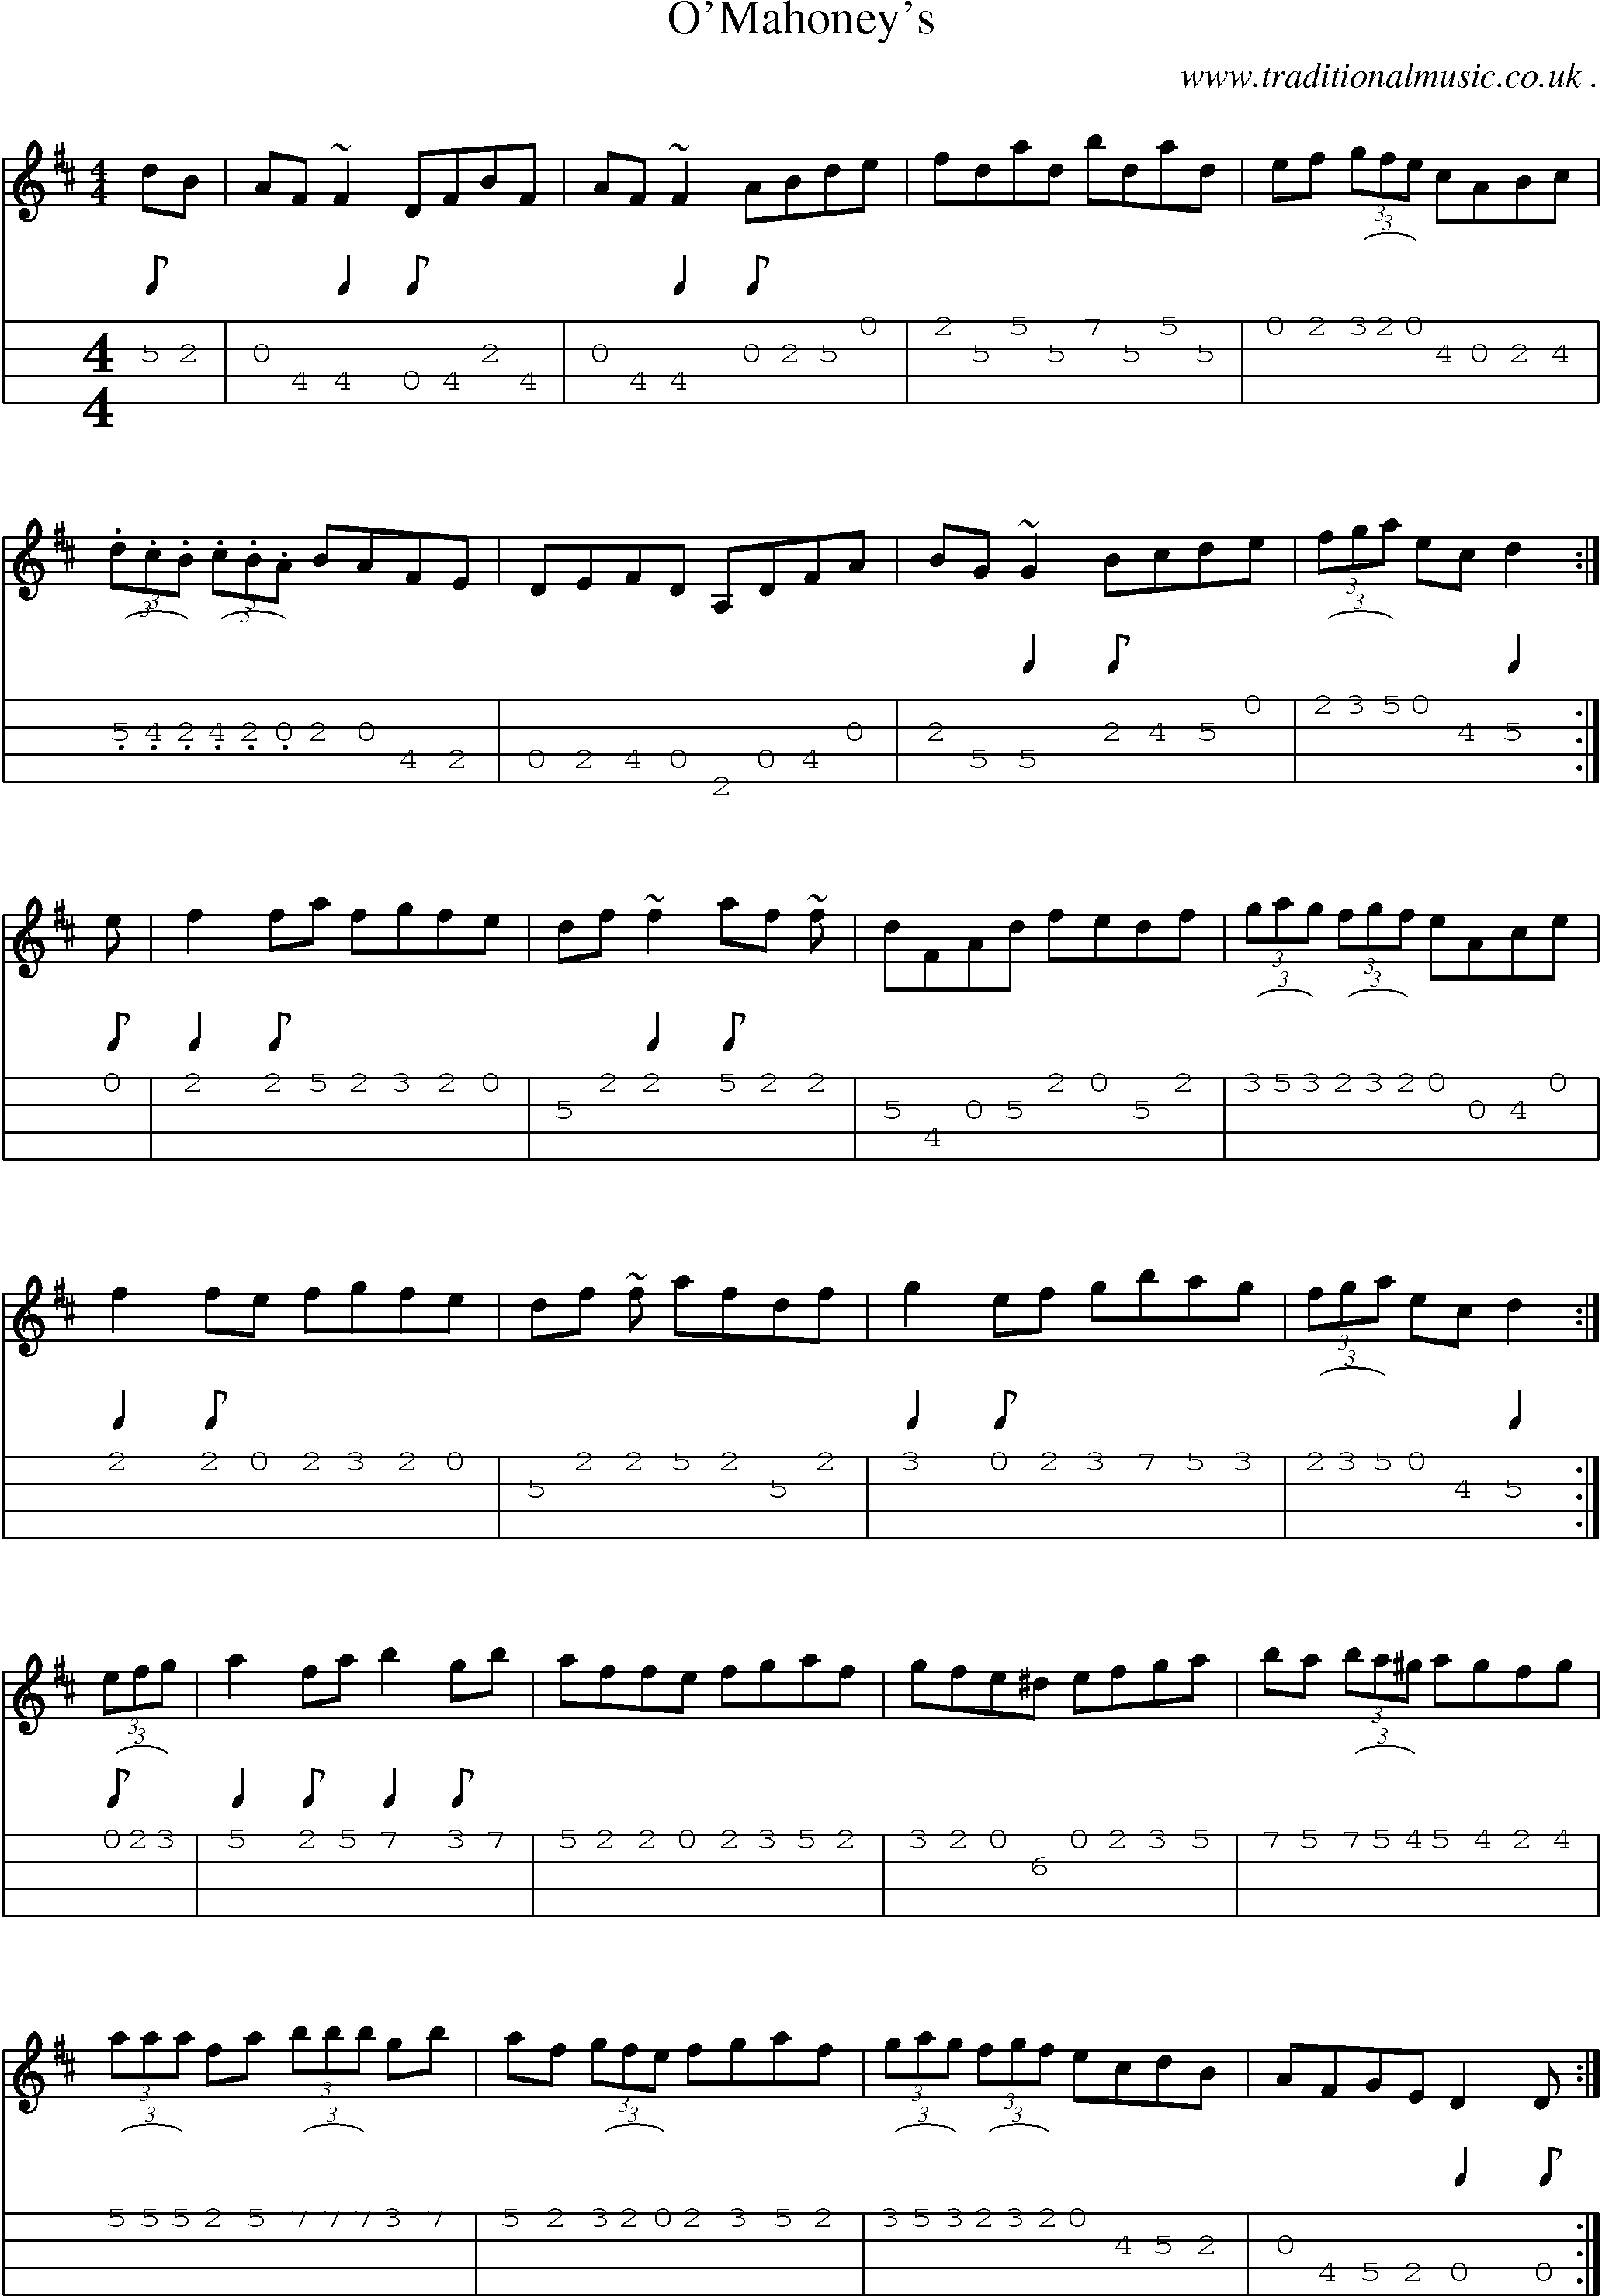 Music Score and Guitar Tabs for Omahoneys